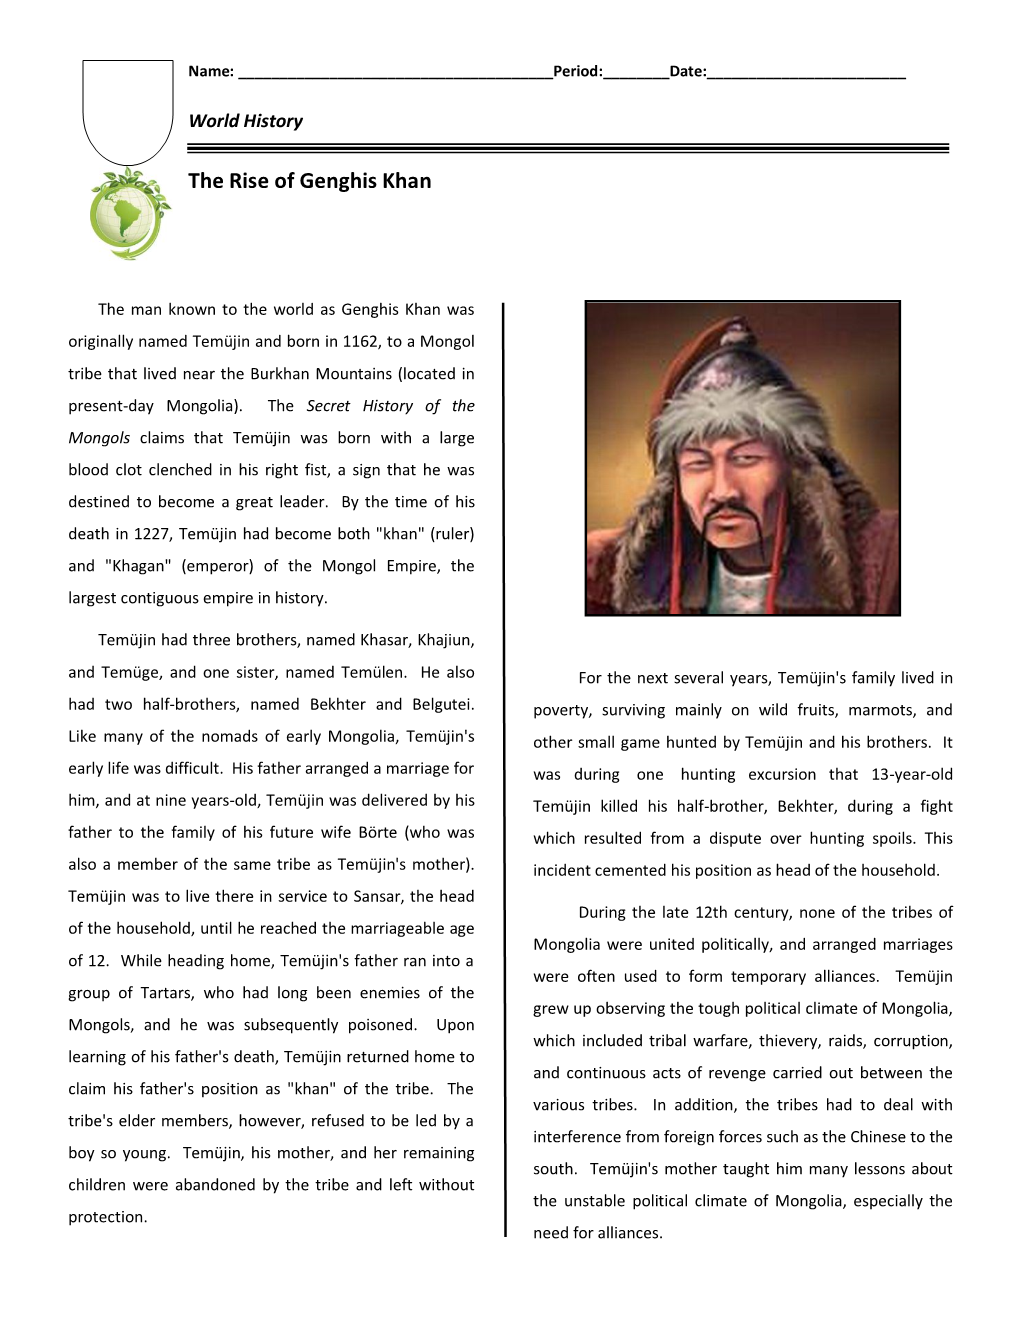 The Rise of Genghis Khan